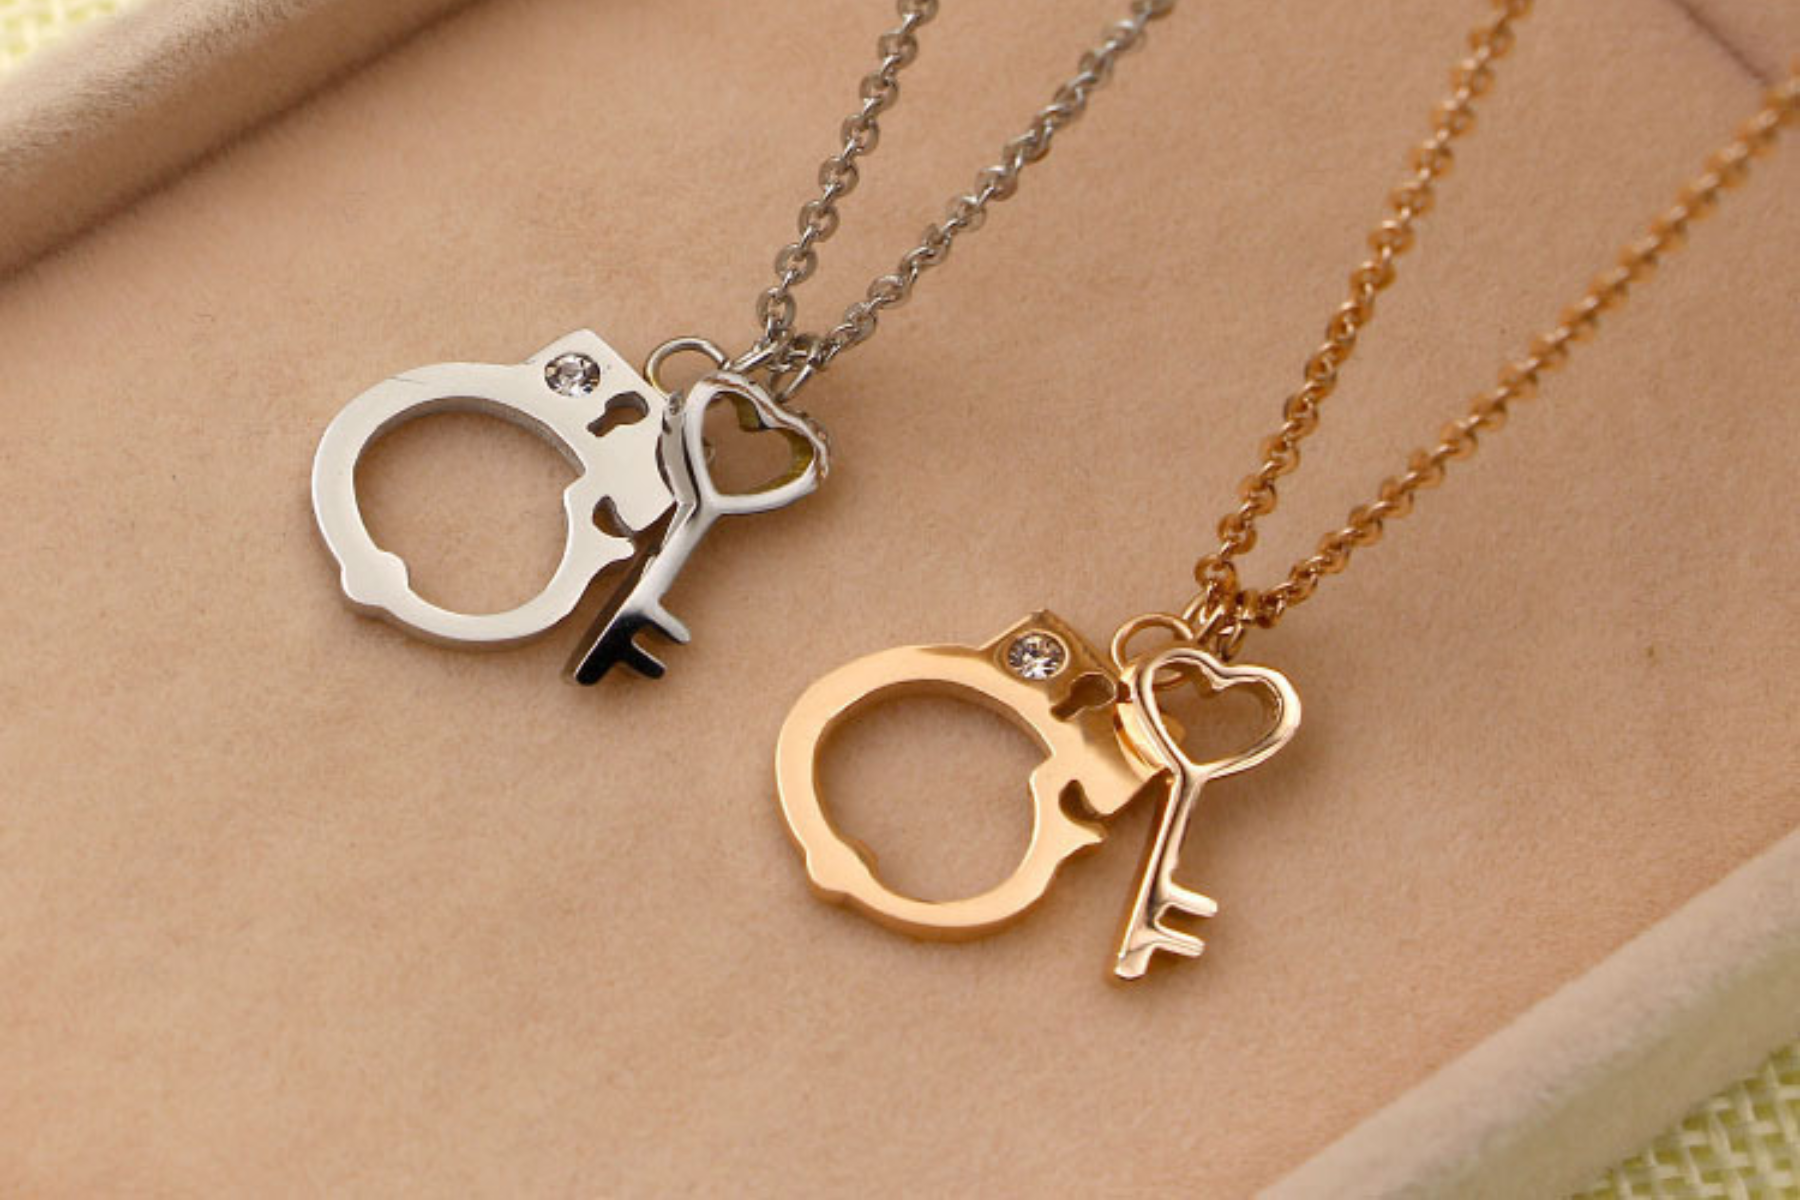 Handcuff Necklaces For Couples - Trendy And Unique